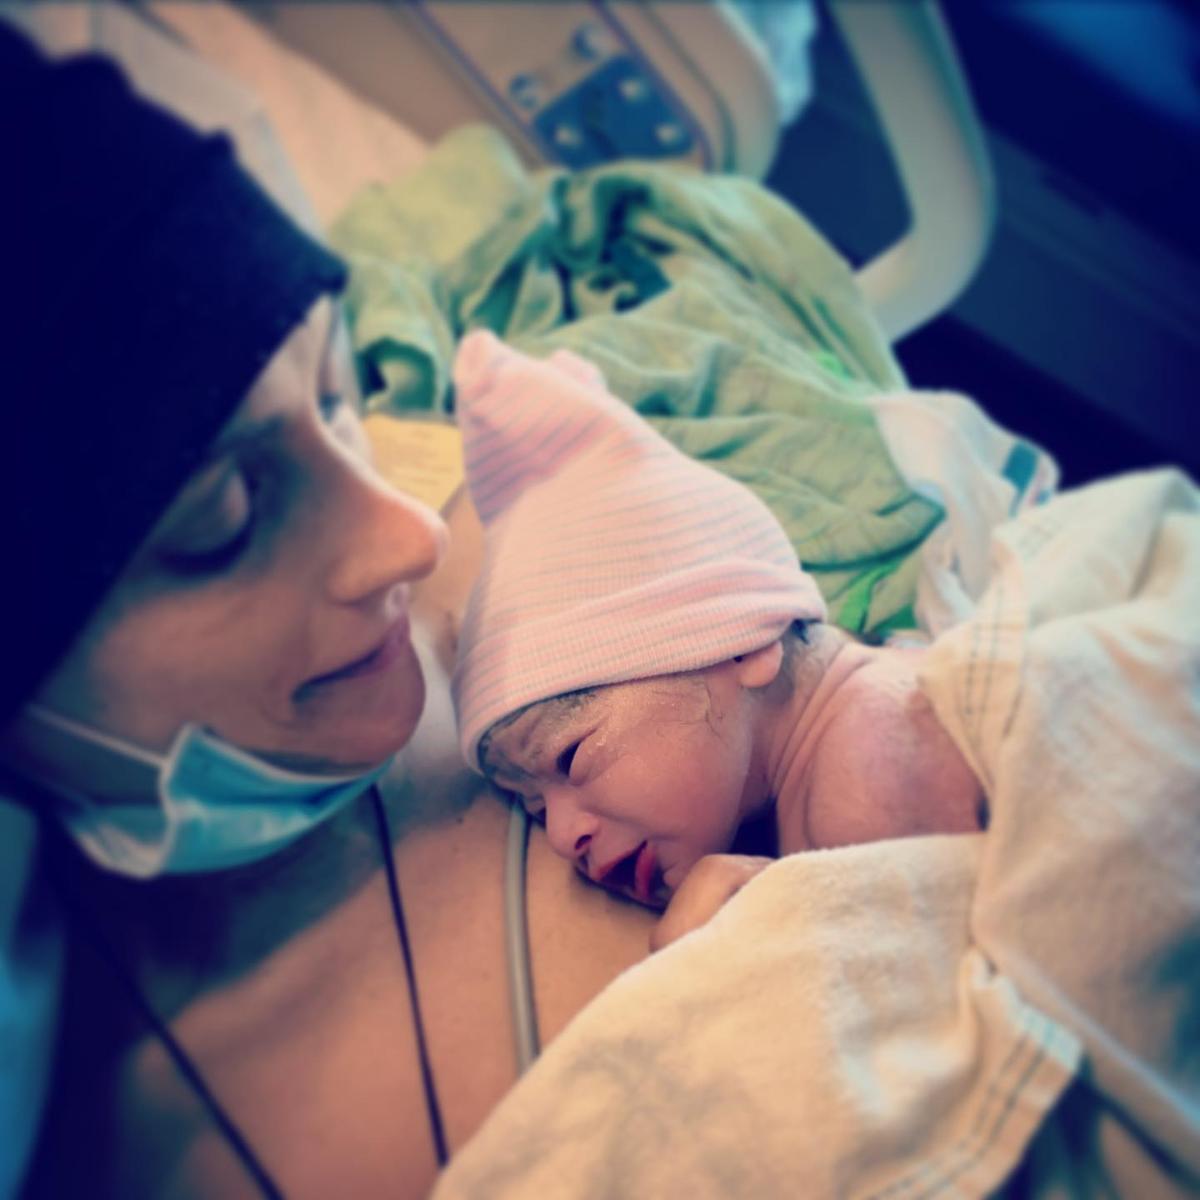 Jessica with baby Thomas. (Courtesy of <a href="https://www.instagram.com/blessed_by_cancer/">Jessica Hanna</a>)